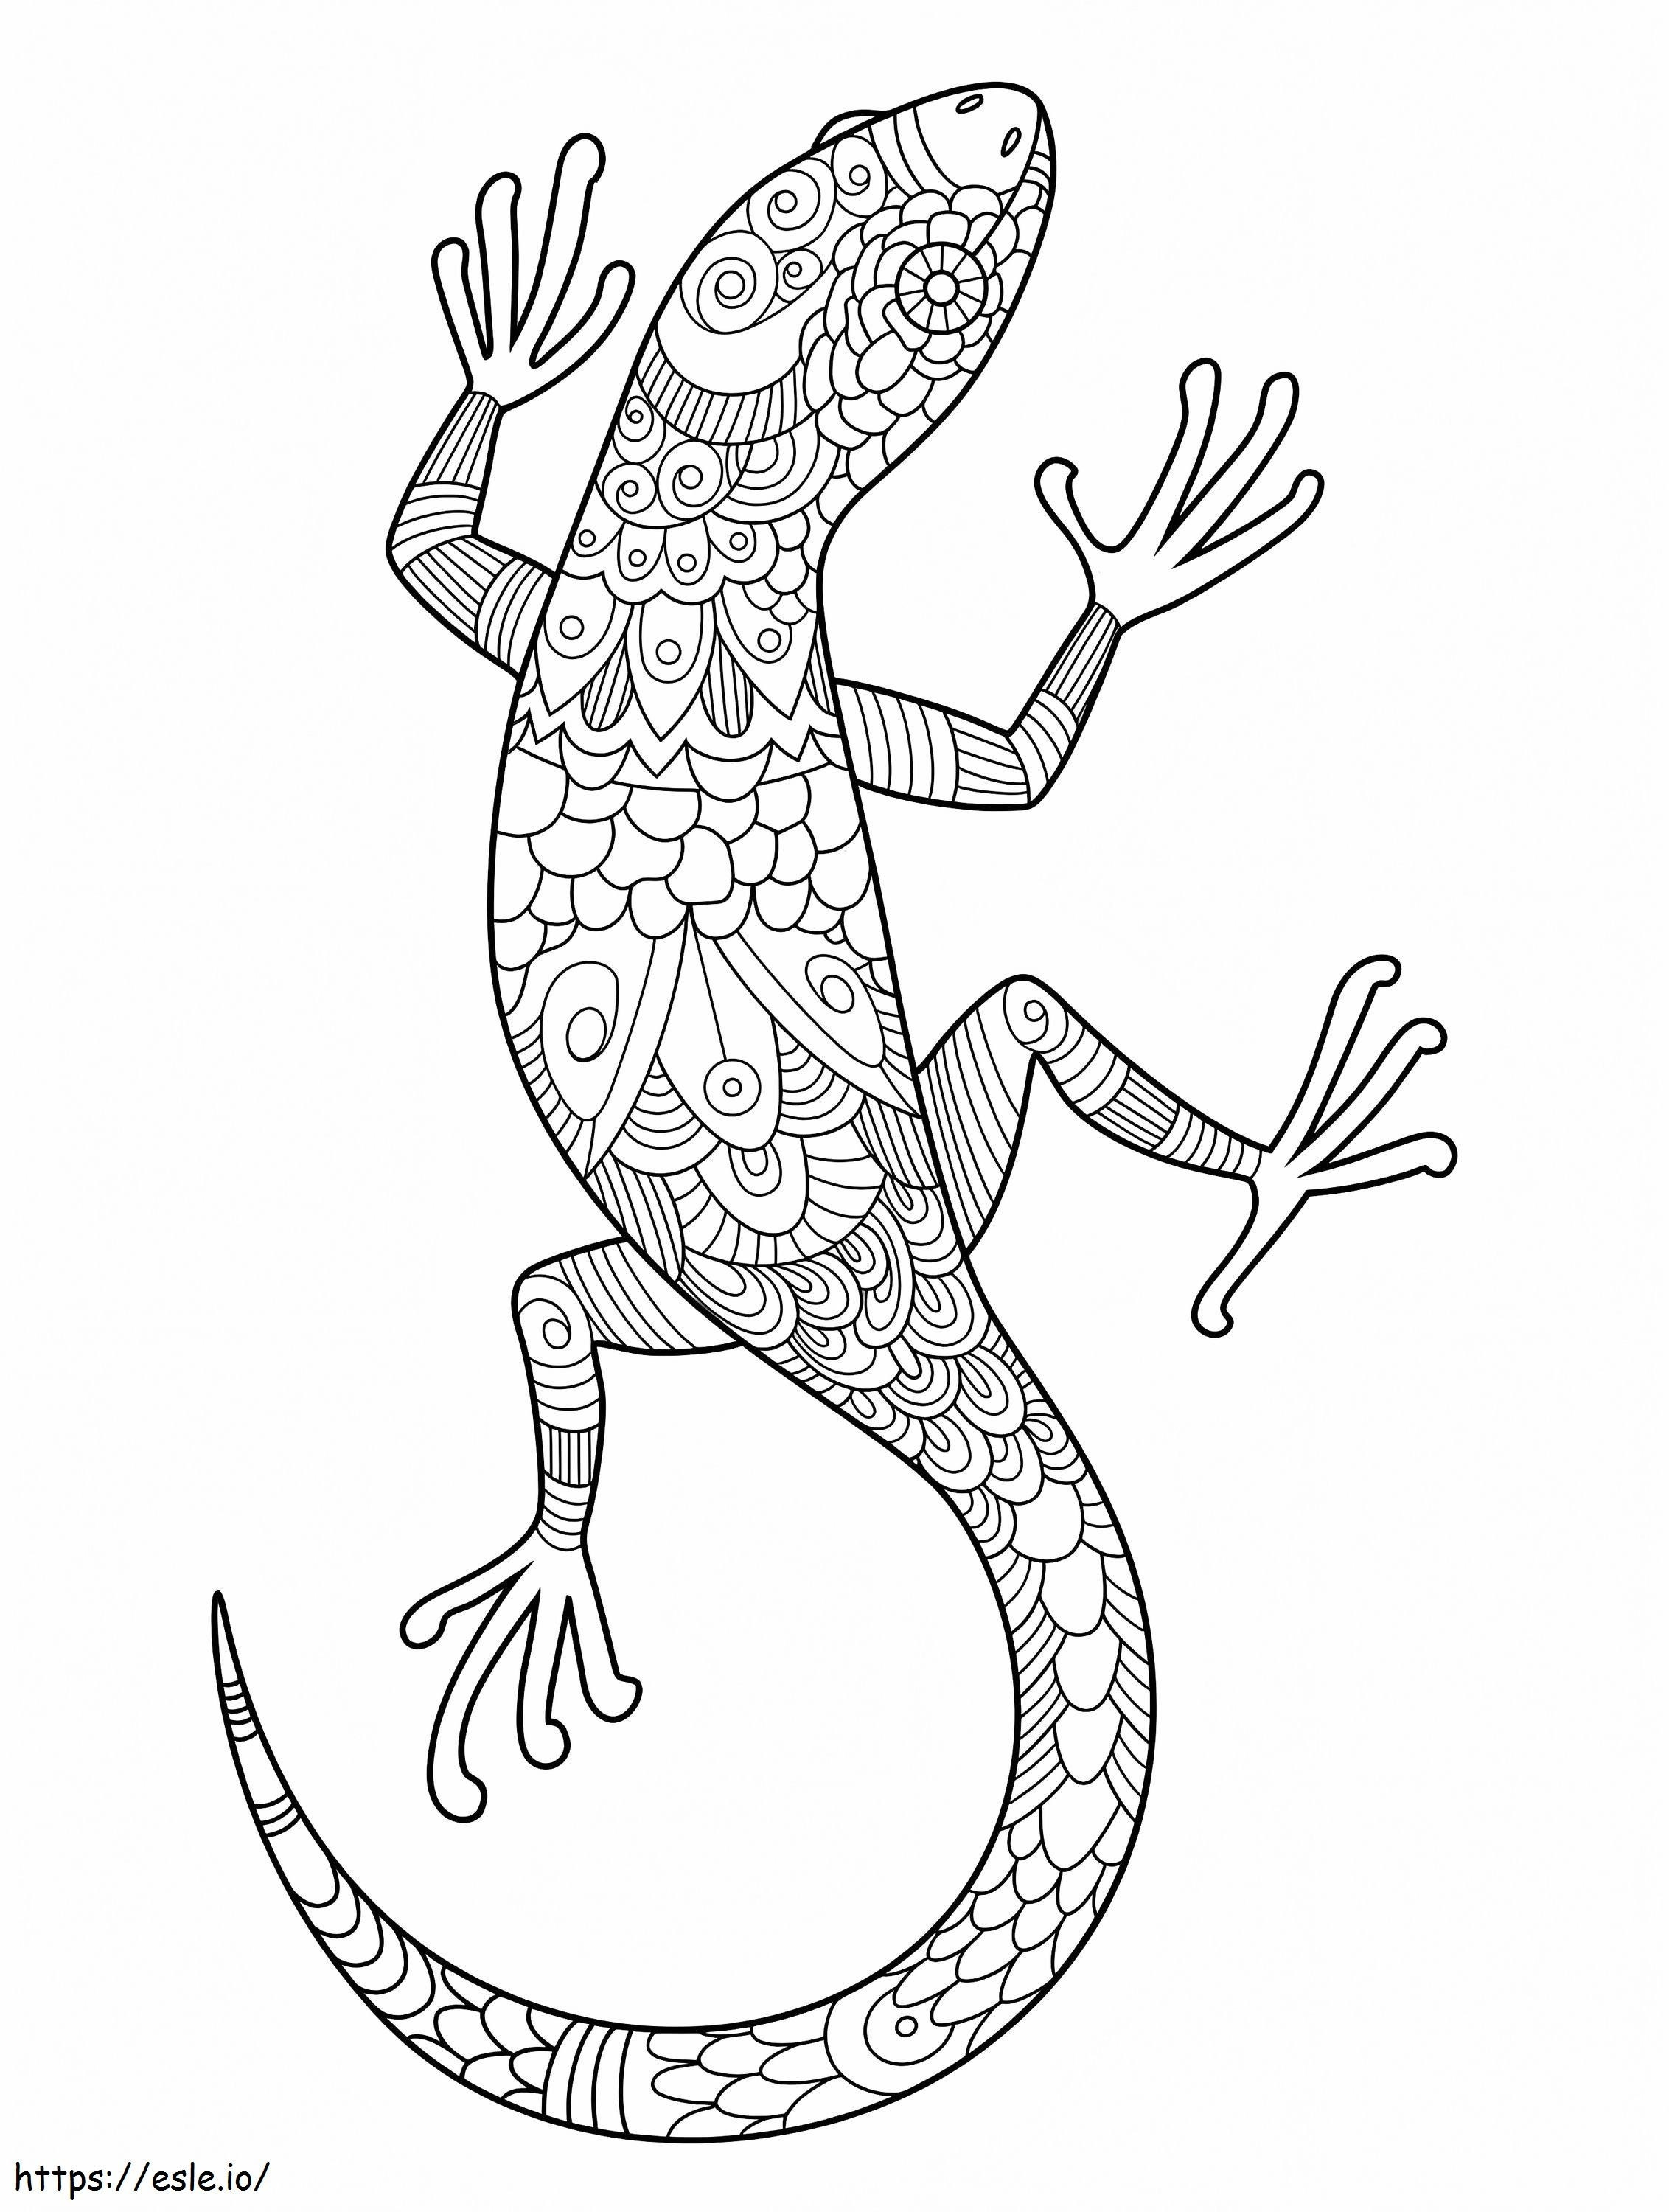 Lizard Is For Adults coloring page